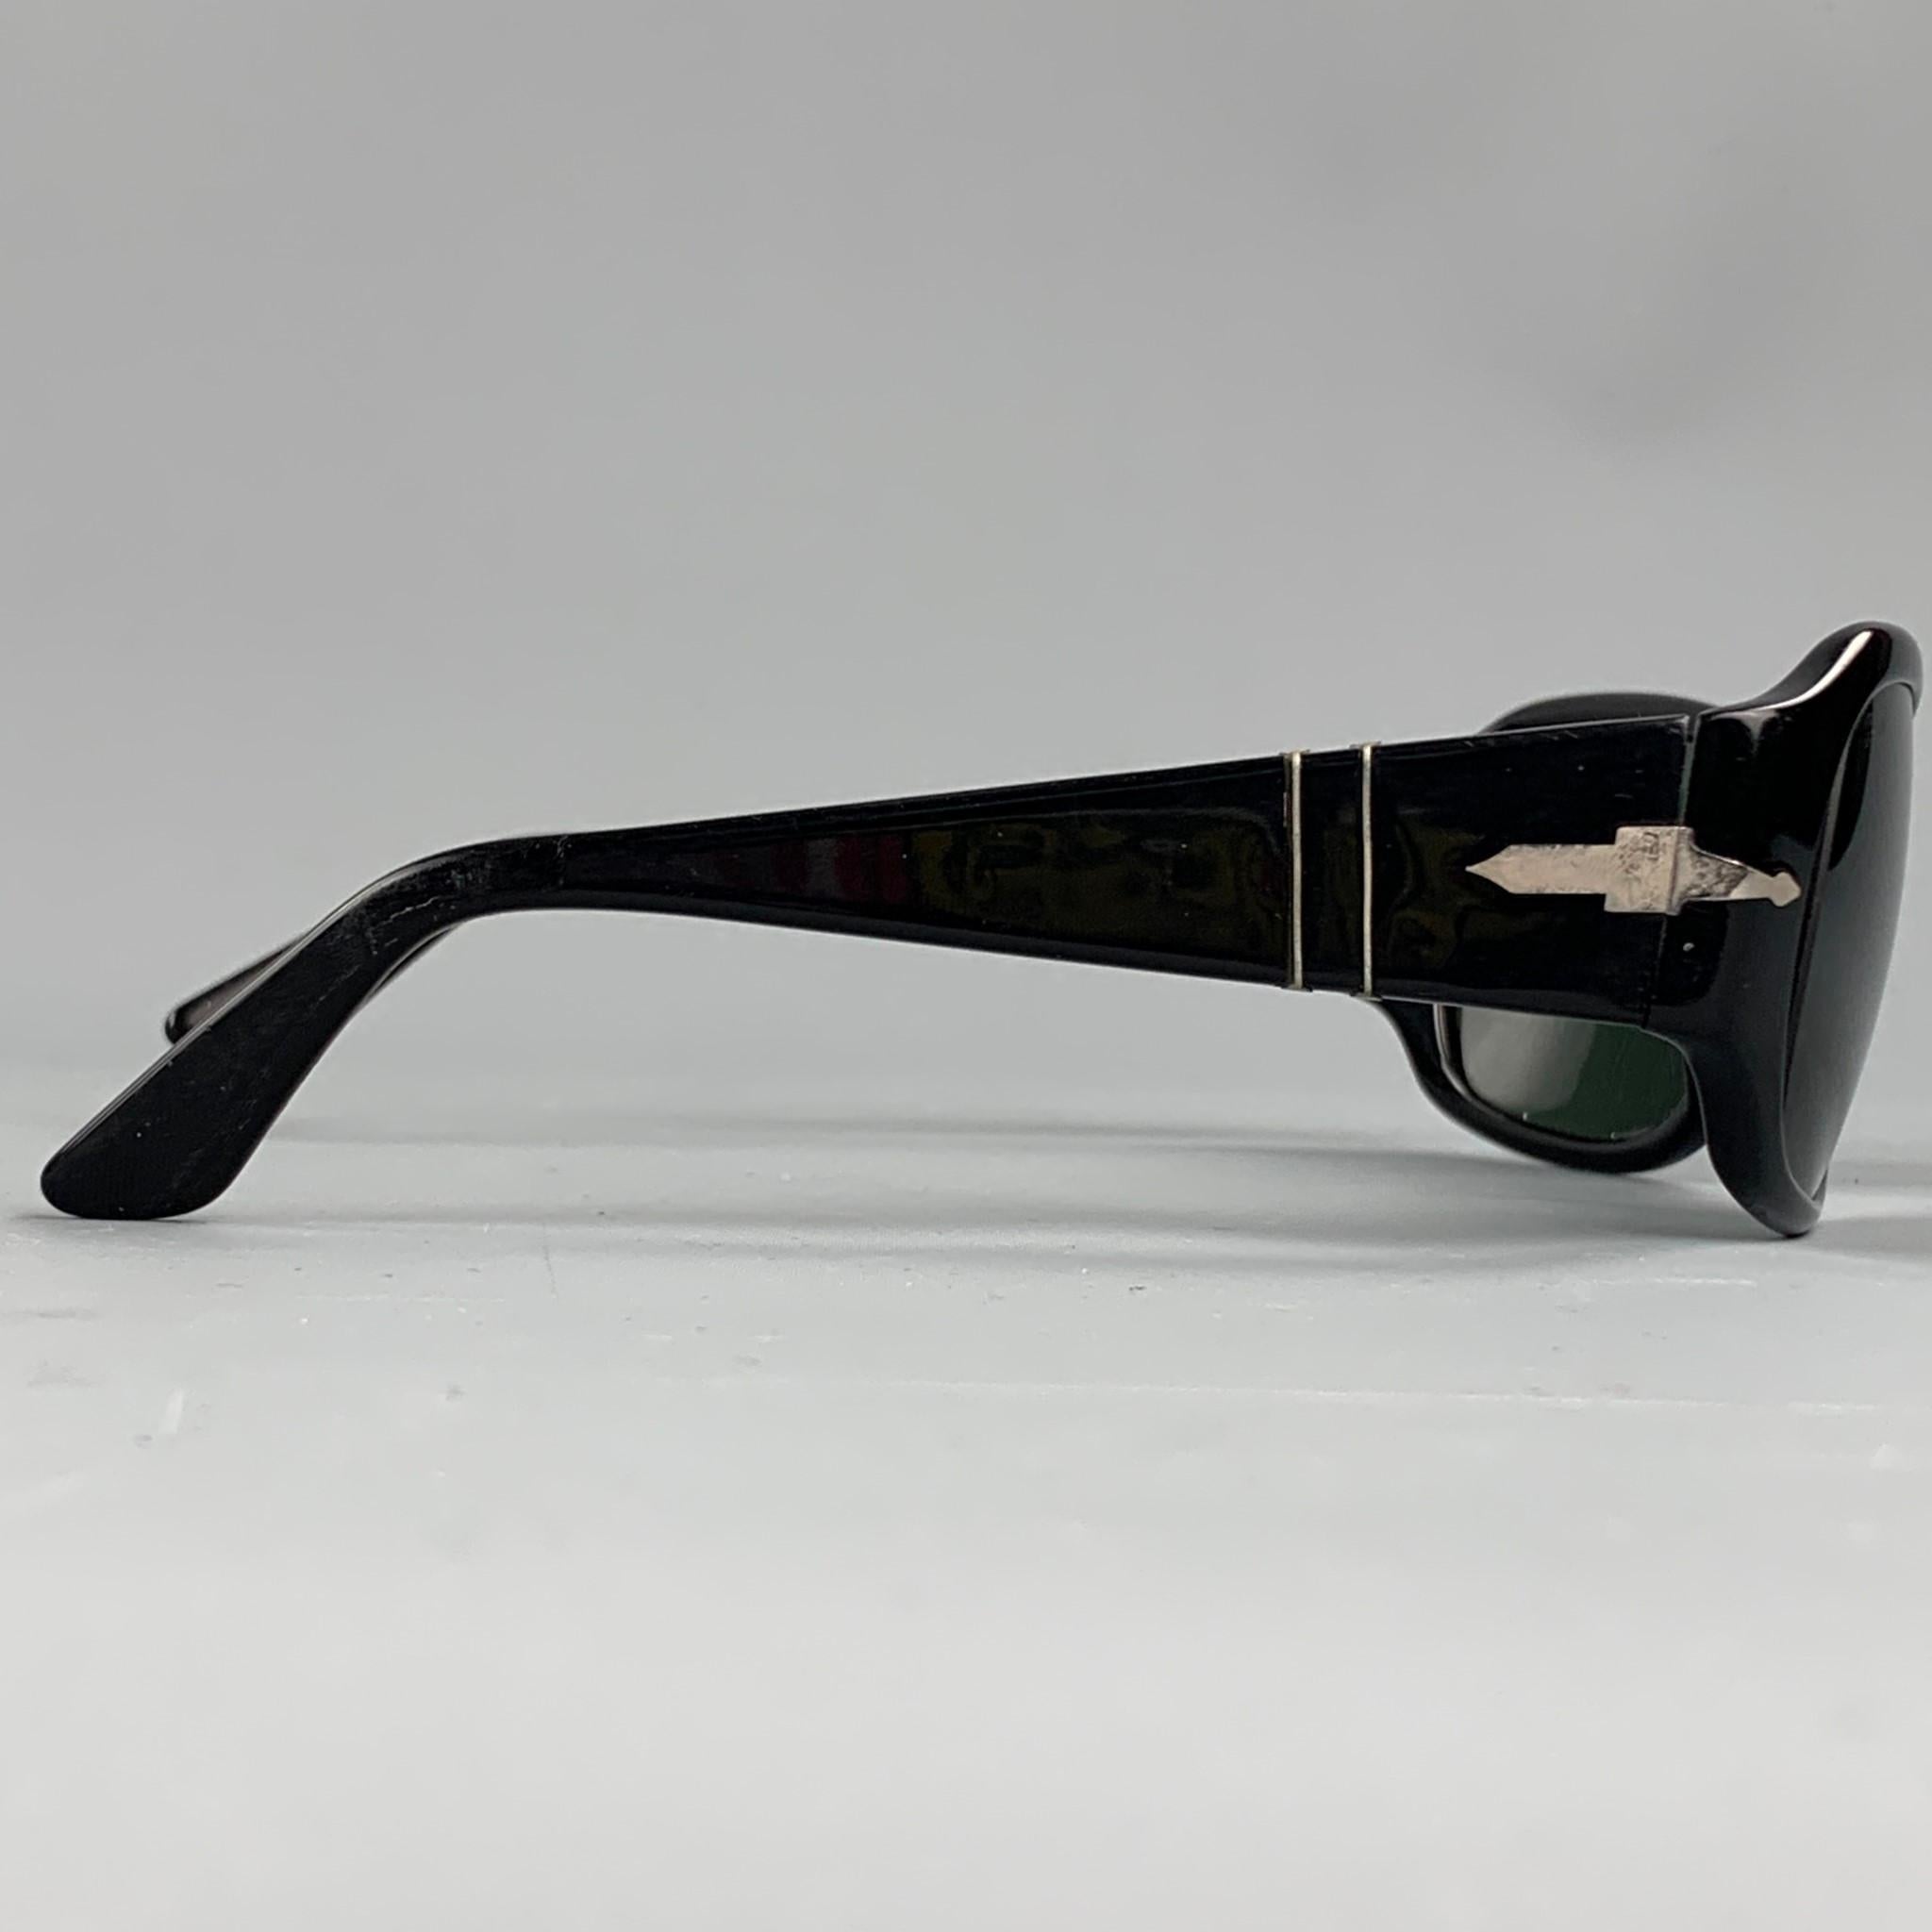 PERSOL sunglasses comes in a black acetate with silver tone hardware details. Comes with box.

Good Pre-Owned Condition.
Marked: 95/31 56/16 125

Measurements:

Length: 13 cm. 
Height: 3 cm. 